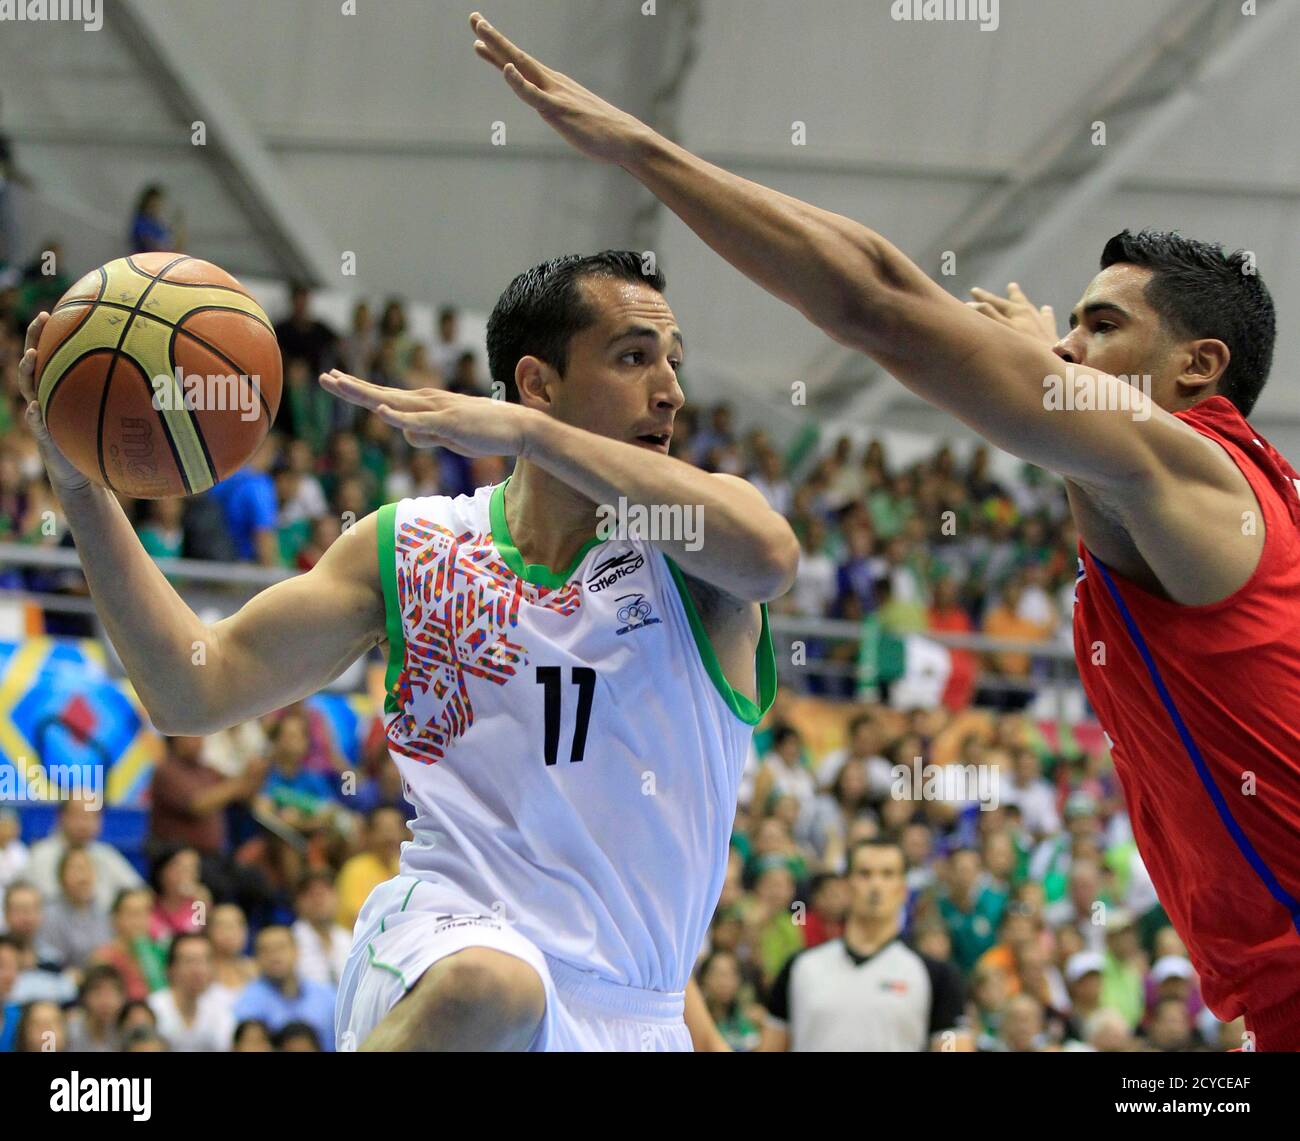 Omar Quintero of Mexico (L) goes up to shoot past Manuel Narvaez of Puerto  Rico during their men's final basketball game at the Pan American Games in  Guadalajara October 30, 2011. REUTERS/Lucy